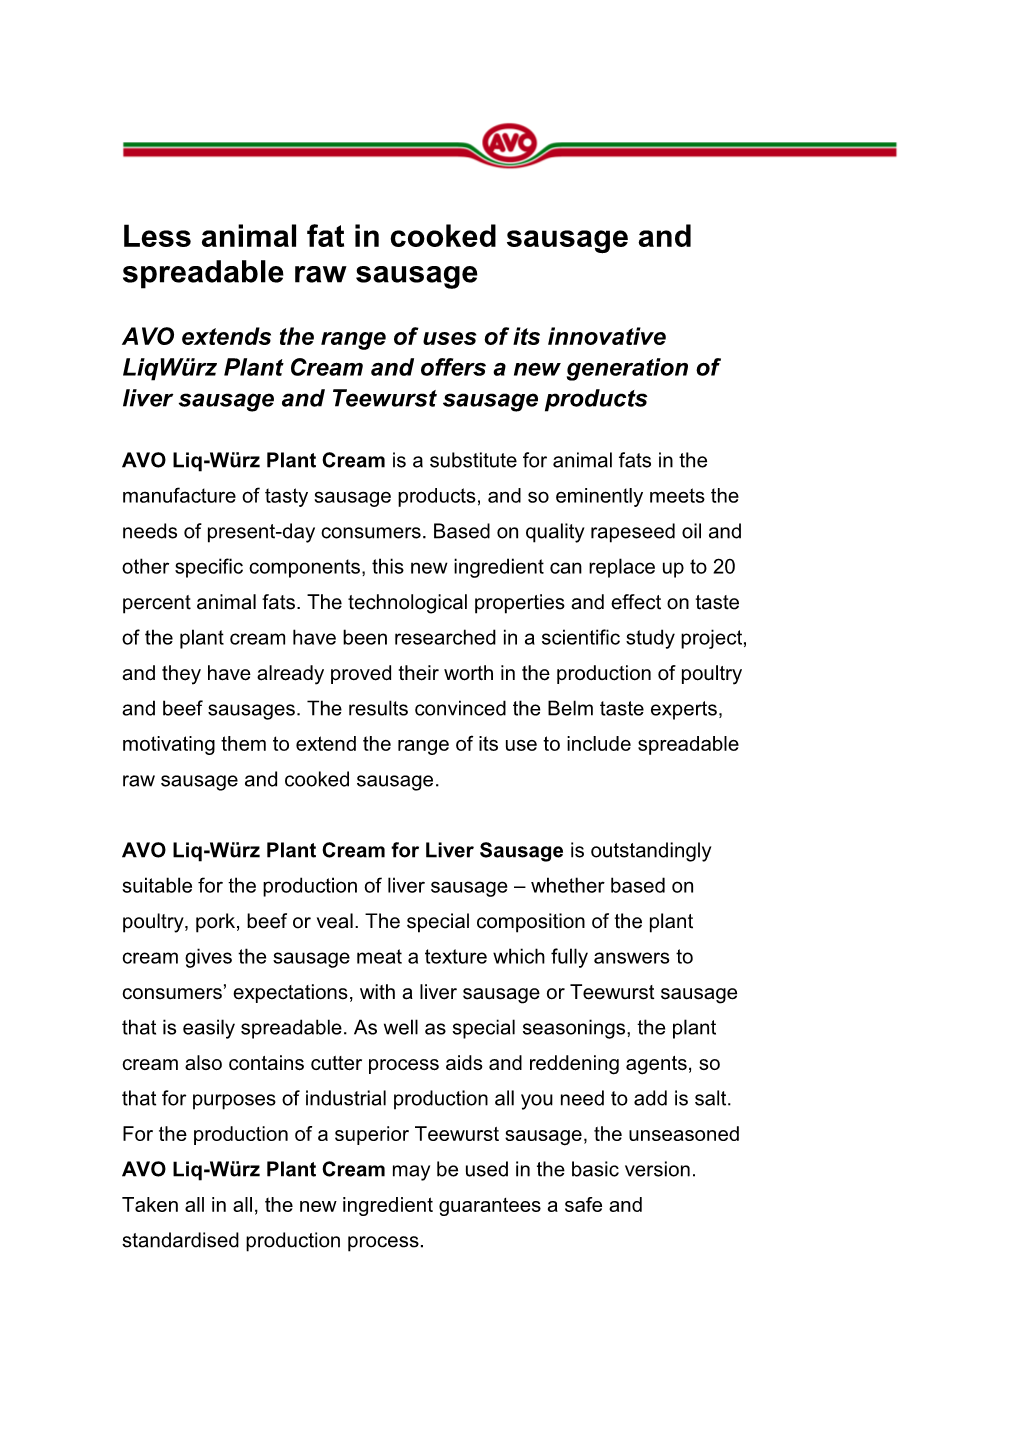 Liqwürz Plant Cream and Offers a New Generation of Liver Sausage and Teewurst Sausage Products